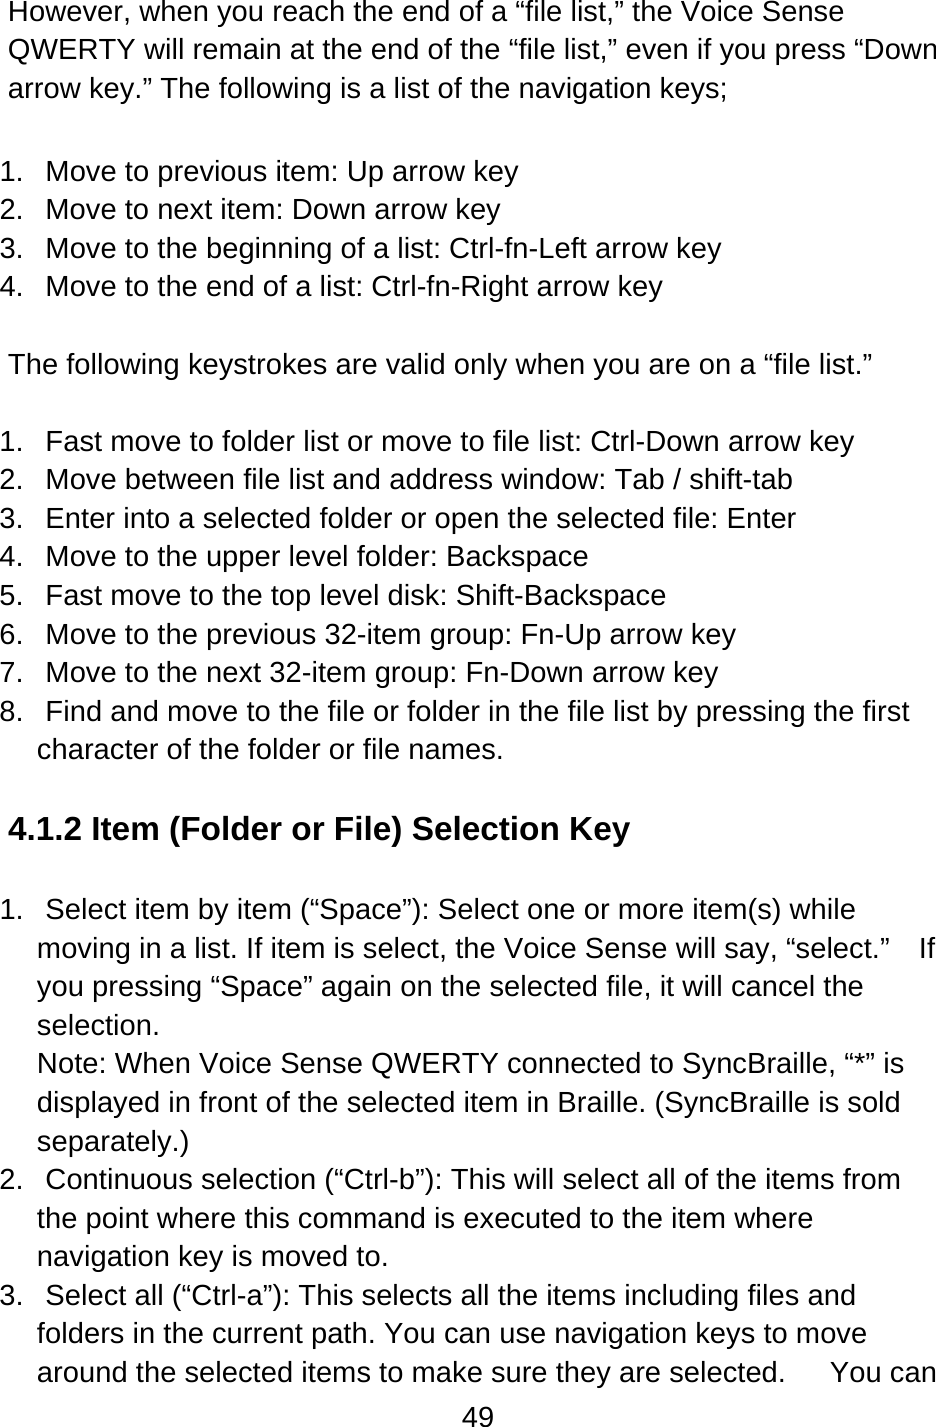 49  However, when you reach the end of a “file list,” the Voice Sense QWERTY will remain at the end of the “file list,” even if you press “Down arrow key.” The following is a list of the navigation keys;  1.  Move to previous item: Up arrow key 2.  Move to next item: Down arrow key 3.  Move to the beginning of a list: Ctrl-fn-Left arrow key 4.  Move to the end of a list: Ctrl-fn-Right arrow key  The following keystrokes are valid only when you are on a “file list.”  1.  Fast move to folder list or move to file list: Ctrl-Down arrow key 2.  Move between file list and address window: Tab / shift-tab   3.  Enter into a selected folder or open the selected file: Enter 4.  Move to the upper level folder: Backspace 5.  Fast move to the top level disk: Shift-Backspace 6.  Move to the previous 32-item group: Fn-Up arrow key 7.  Move to the next 32-item group: Fn-Down arrow key 8.  Find and move to the file or folder in the file list by pressing the first character of the folder or file names.    4.1.2 Item (Folder or File) Selection Key    1.  Select item by item (“Space”): Select one or more item(s) while moving in a list. If item is select, the Voice Sense will say, “select.”    If you pressing “Space” again on the selected file, it will cancel the selection.   Note: When Voice Sense QWERTY connected to SyncBraille, “*” is displayed in front of the selected item in Braille. (SyncBraille is sold separately.) 2.  Continuous selection (“Ctrl-b”): This will select all of the items from the point where this command is executed to the item where navigation key is moved to. 3.  Select all (“Ctrl-a”): This selects all the items including files and folders in the current path. You can use navigation keys to move around the selected items to make sure they are selected.      You can 